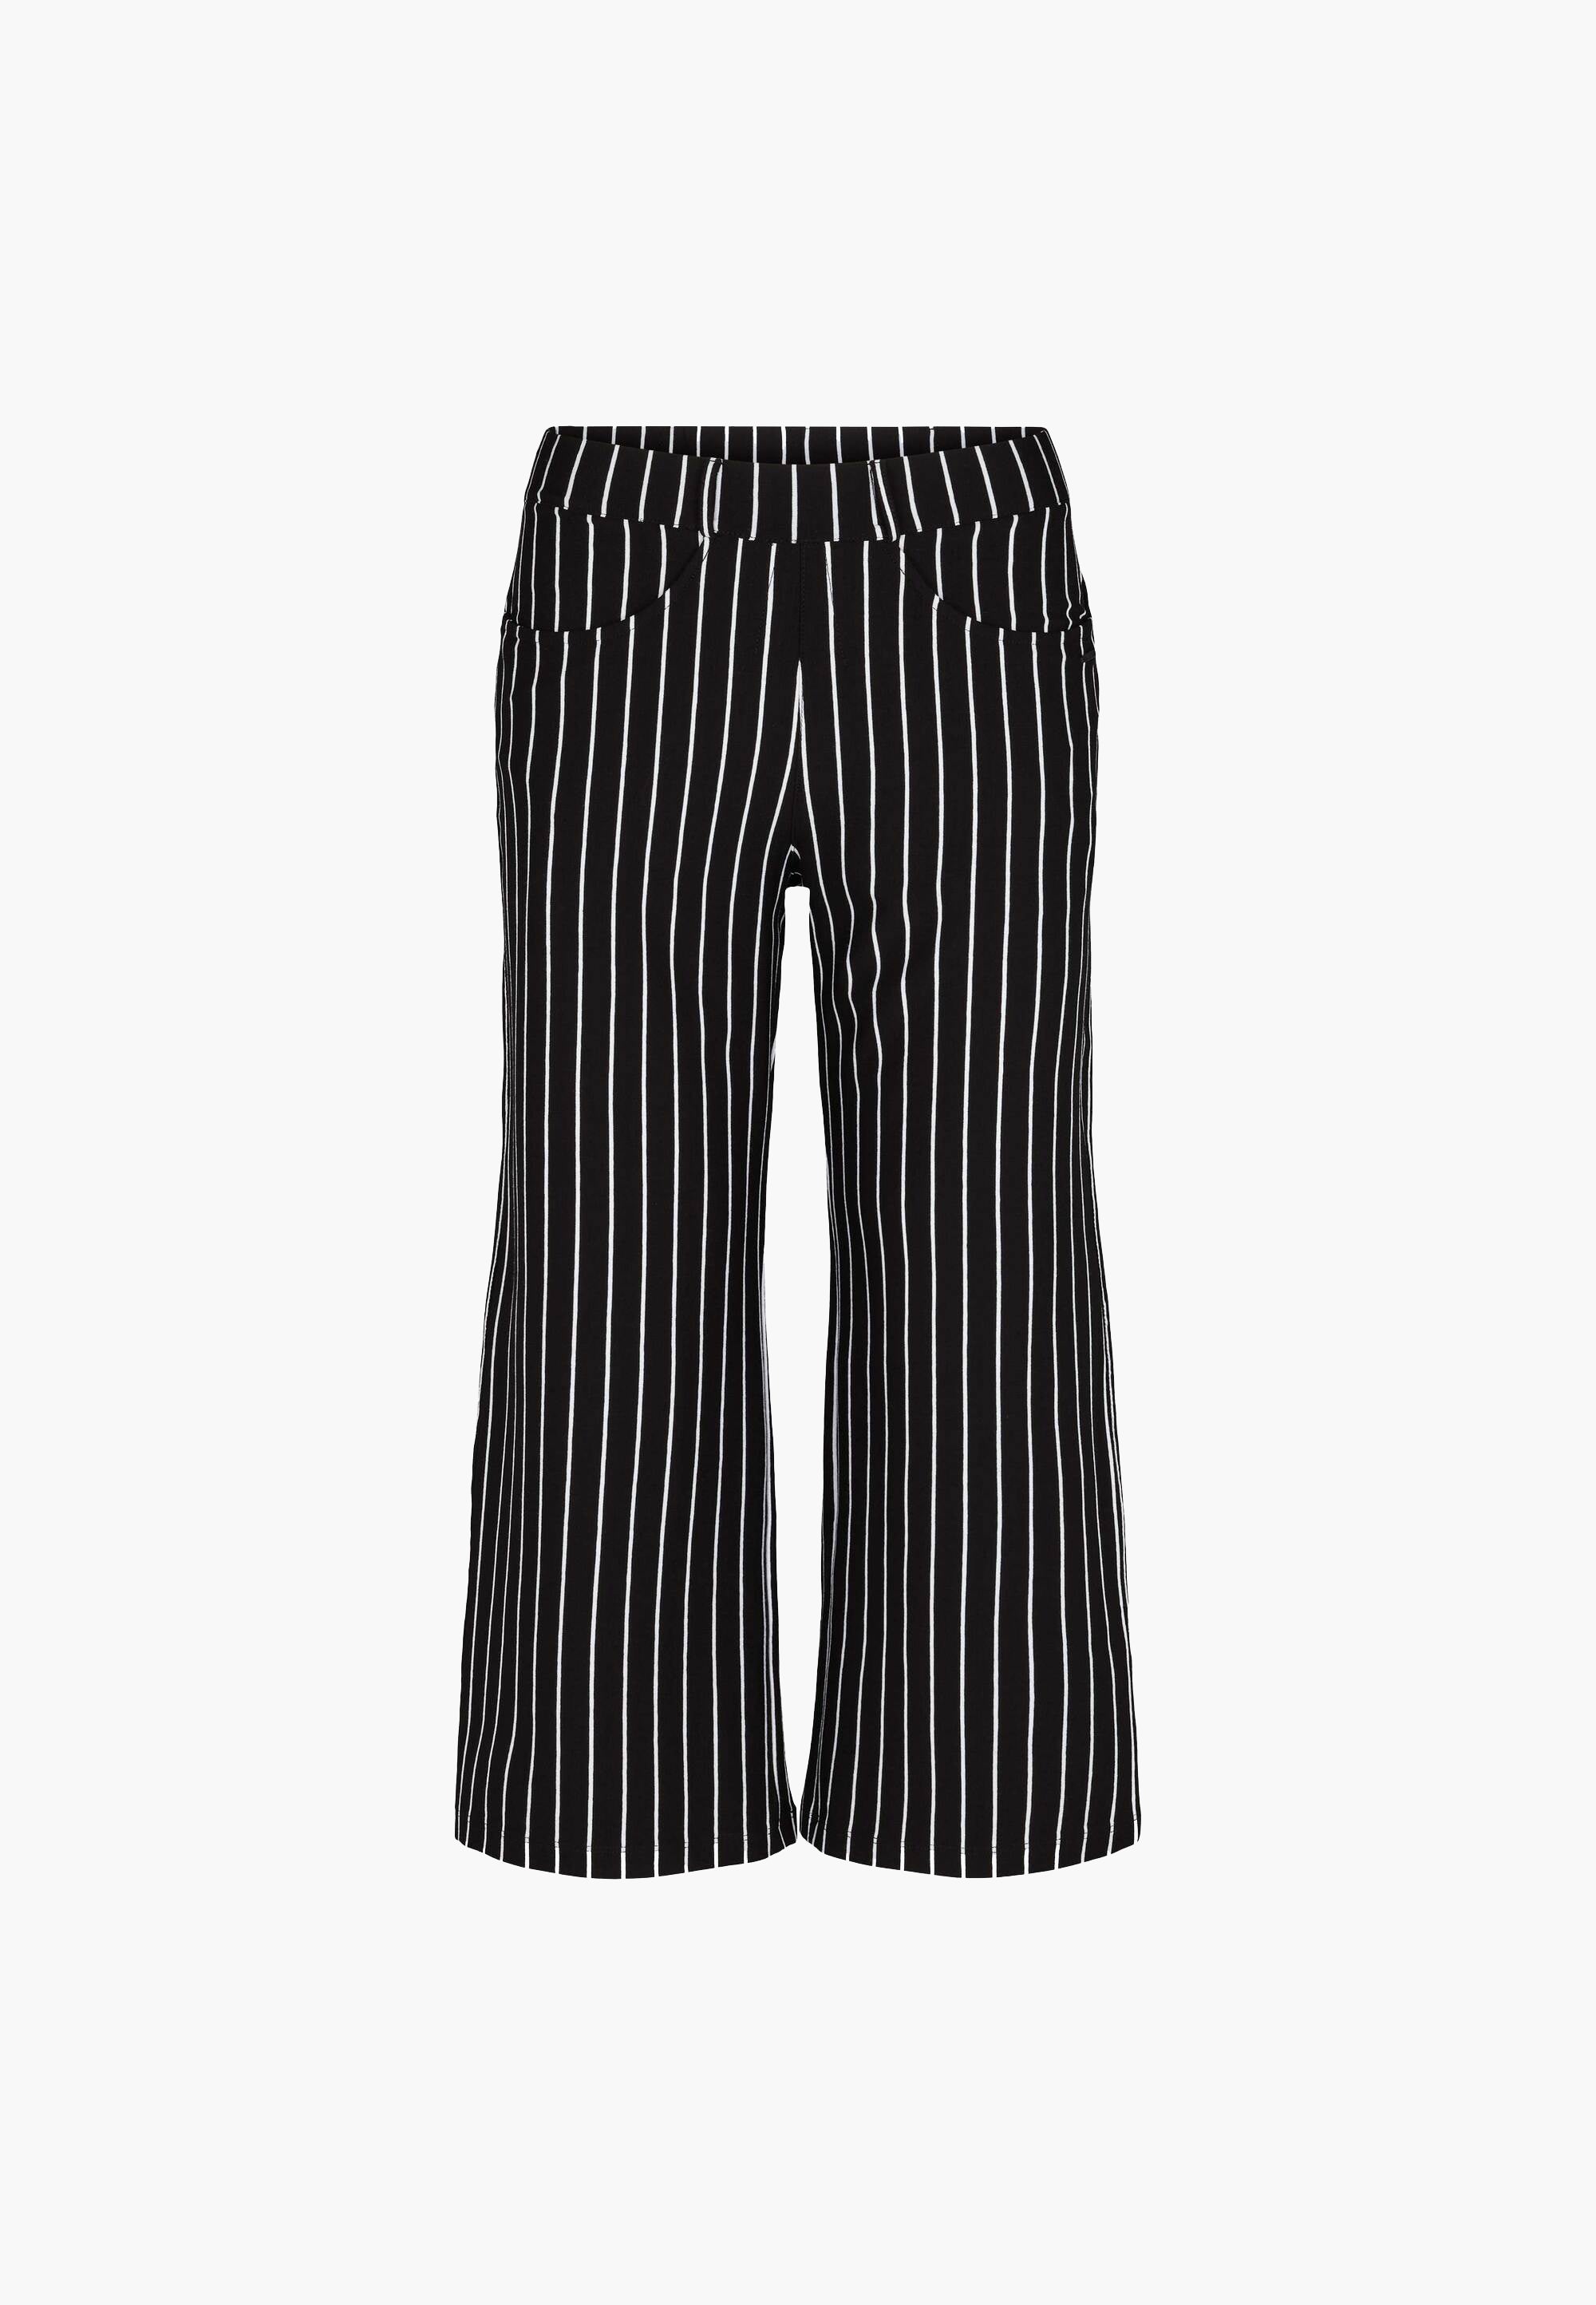 LAURIE Donna Loose Crop Trousers LOOSE 99222 Black Stripe